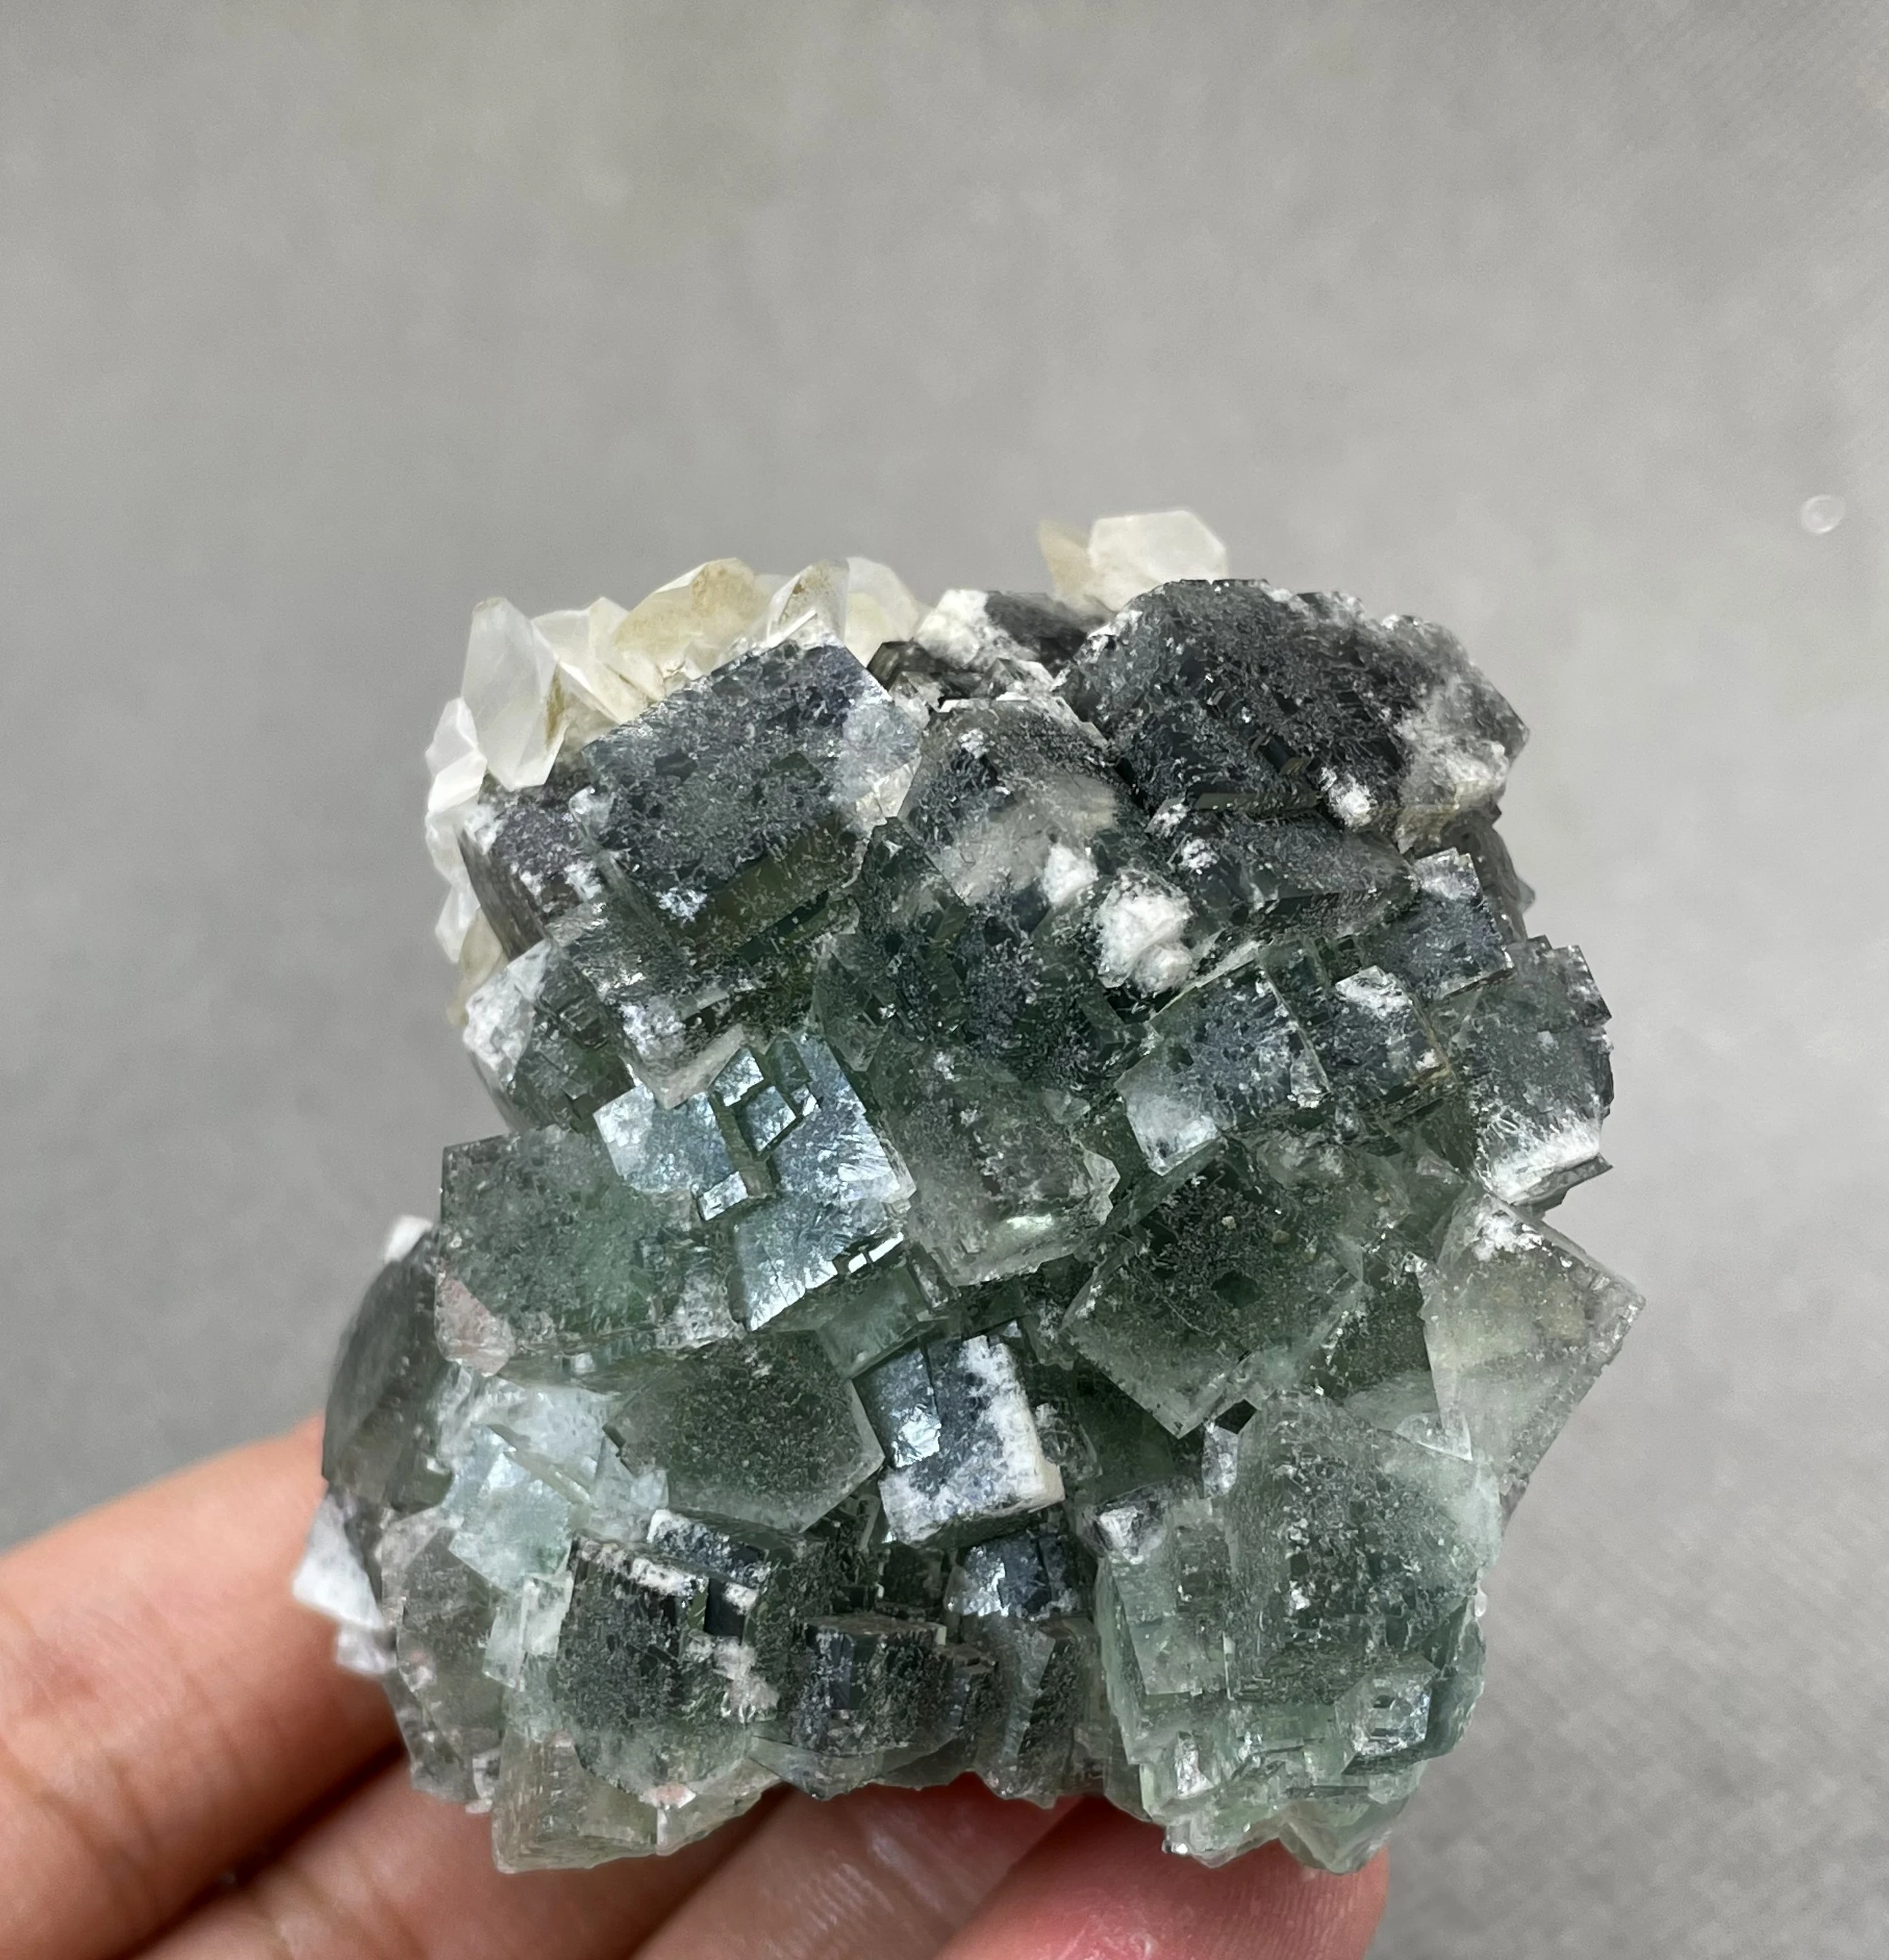 

NEW! 190g natural fluorite and flaky fluorescent calcite symbiotic mineral specimen stones and crystals healing crystals quartz